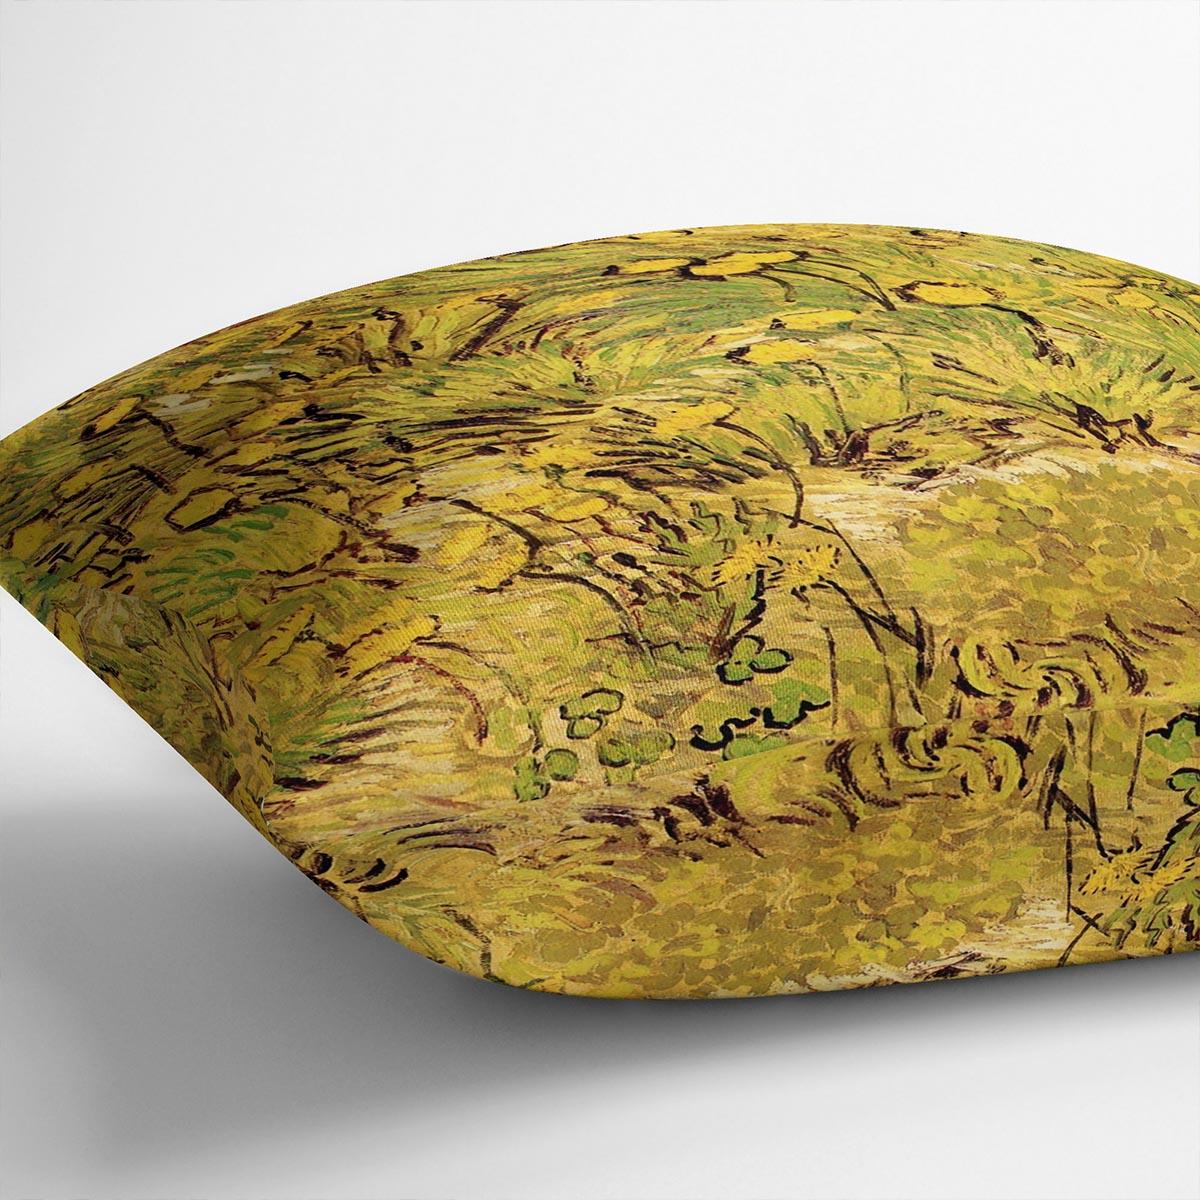 A Field of Yellow Flowers by Van Gogh Cushion